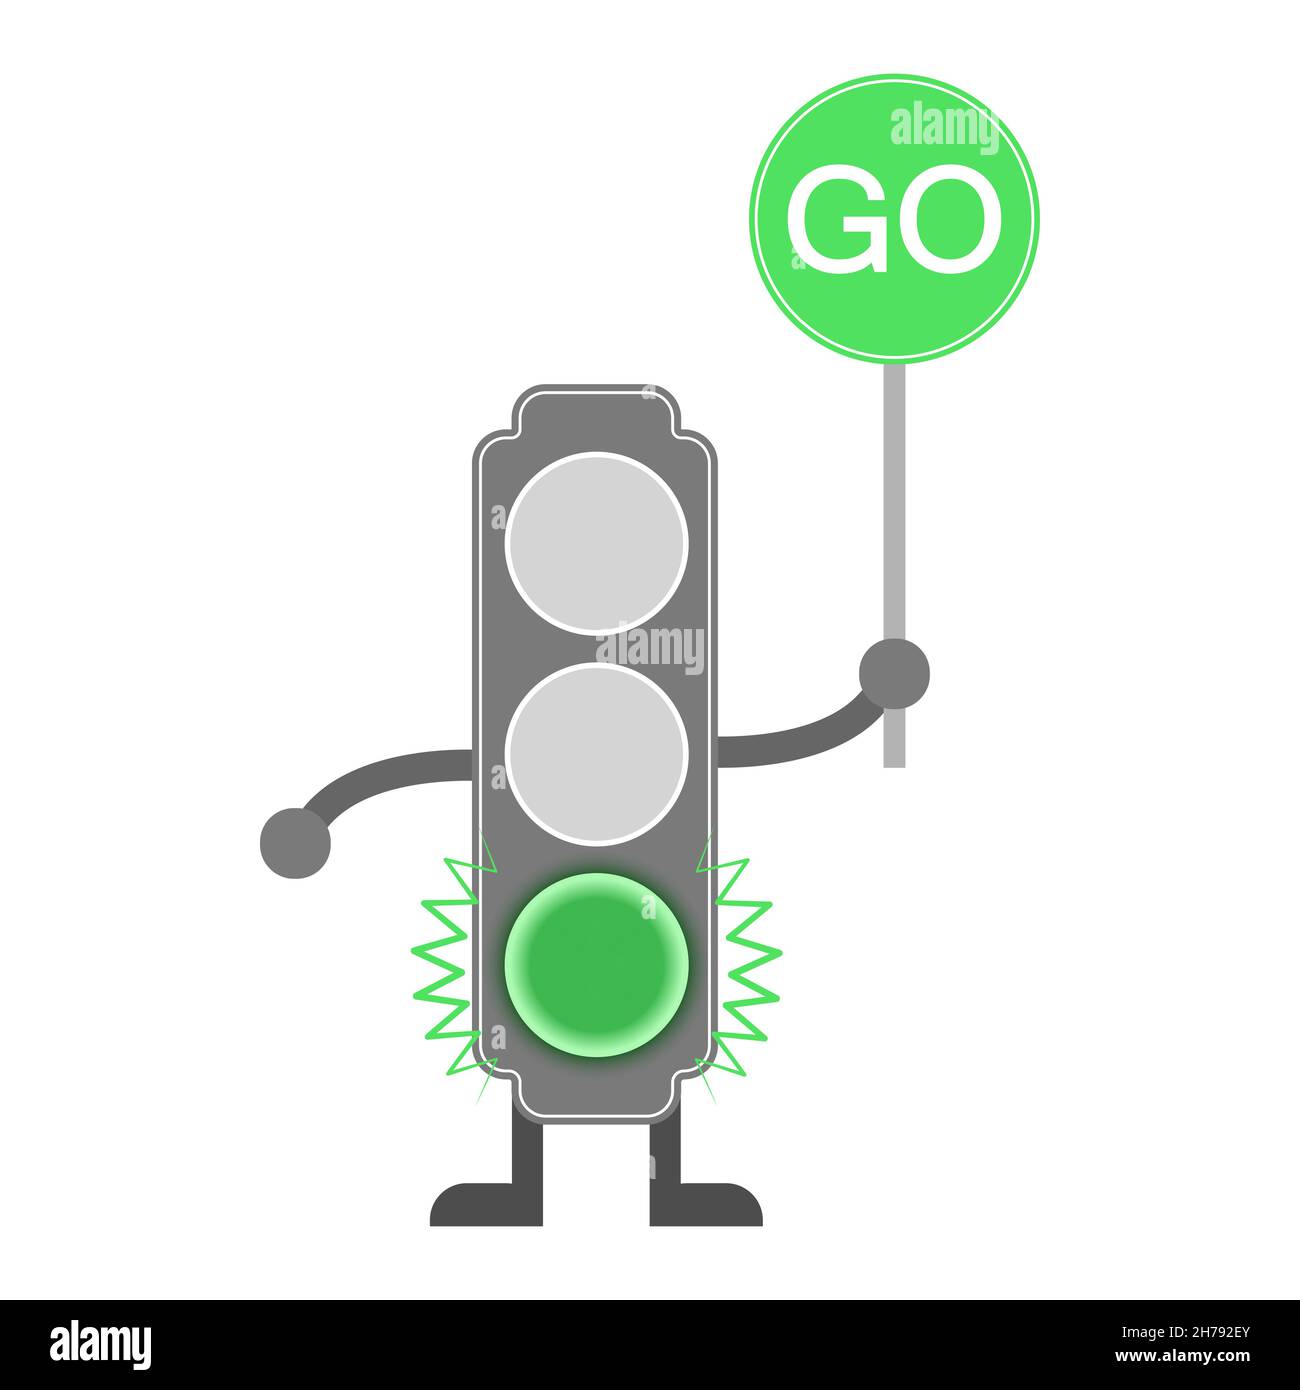 https://c8.alamy.com/comp/2H792EY/illustration-of-a-traffic-light-with-a-green-signal-and-a-go-sign-for-childrens-education-a-book-a-banner-a-poster-and-creative-design-flat-styl-2H792EY.jpg